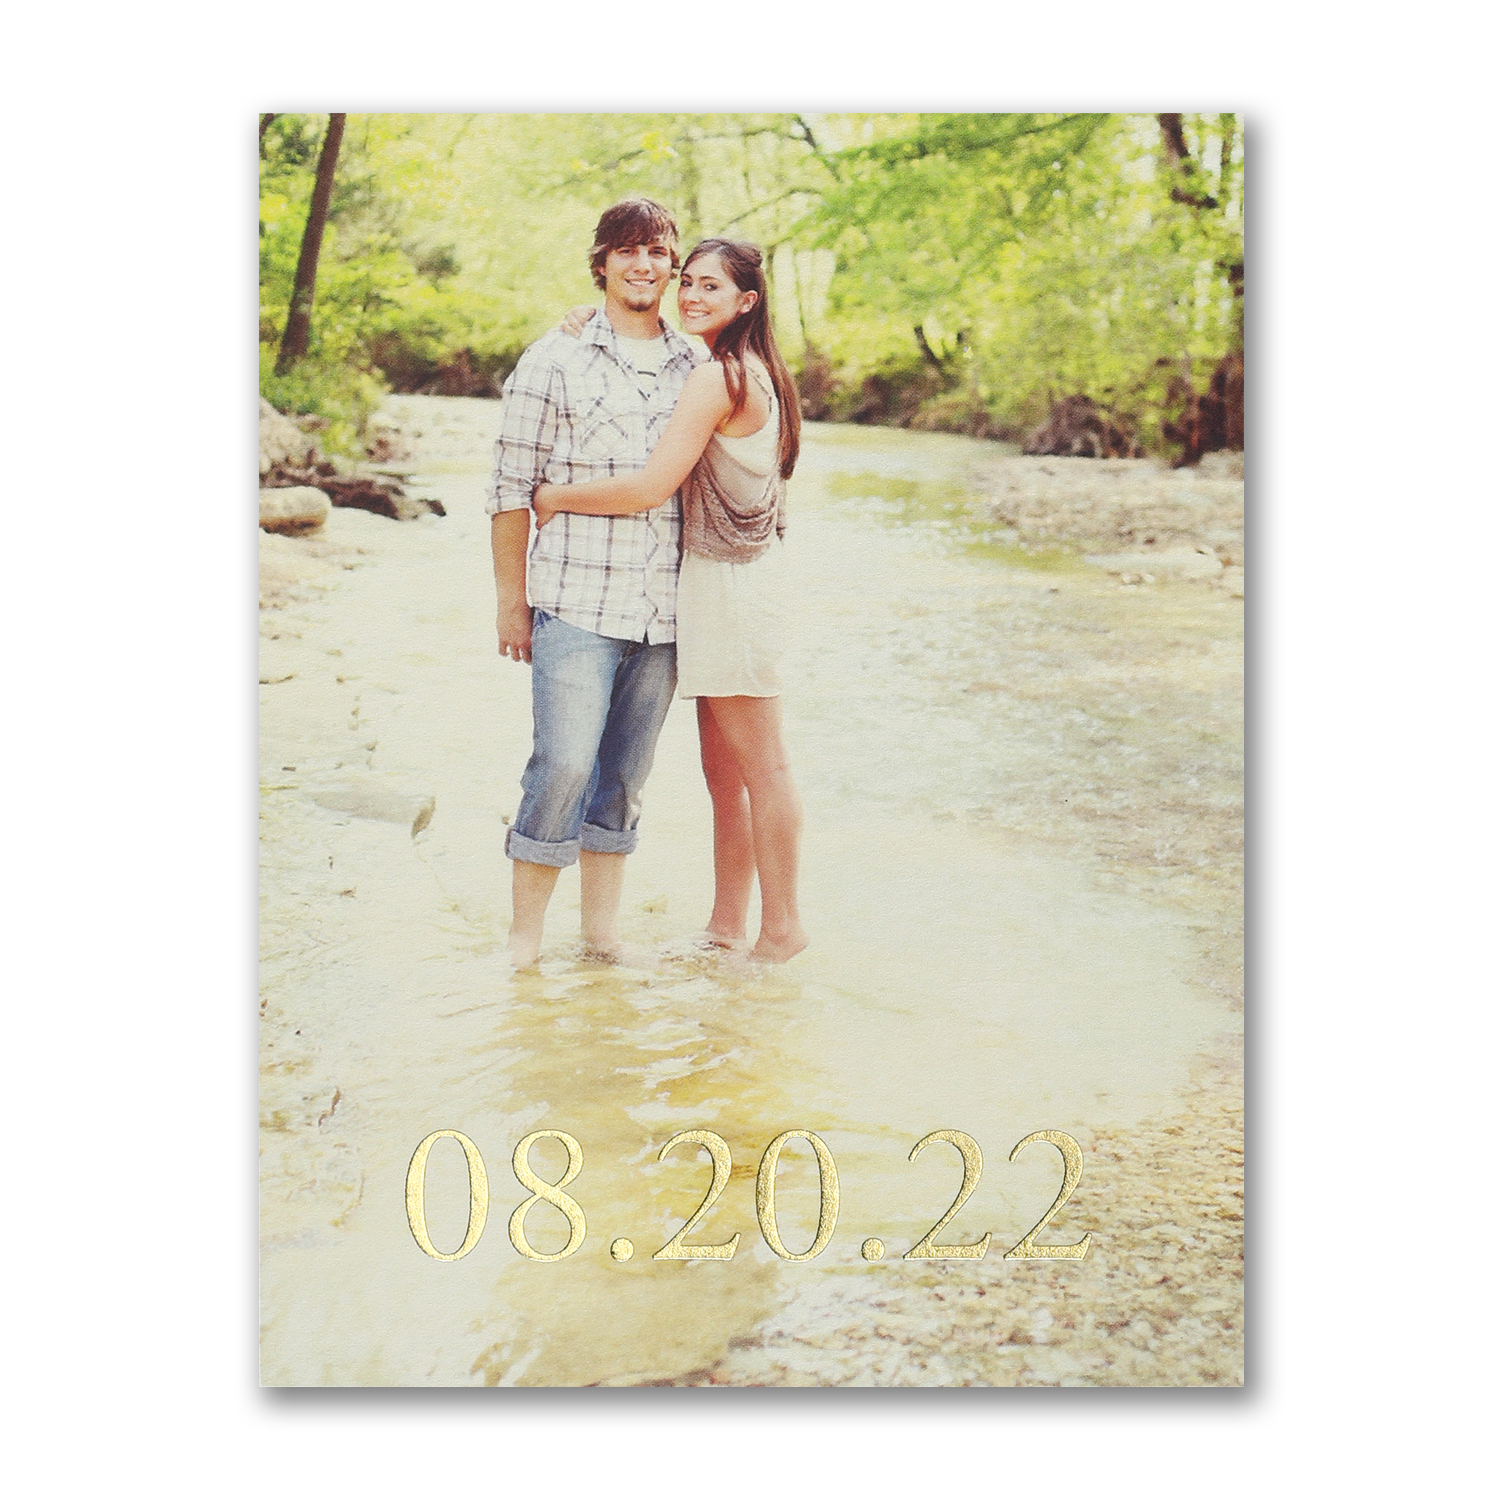 gold foil photo save the date postcard